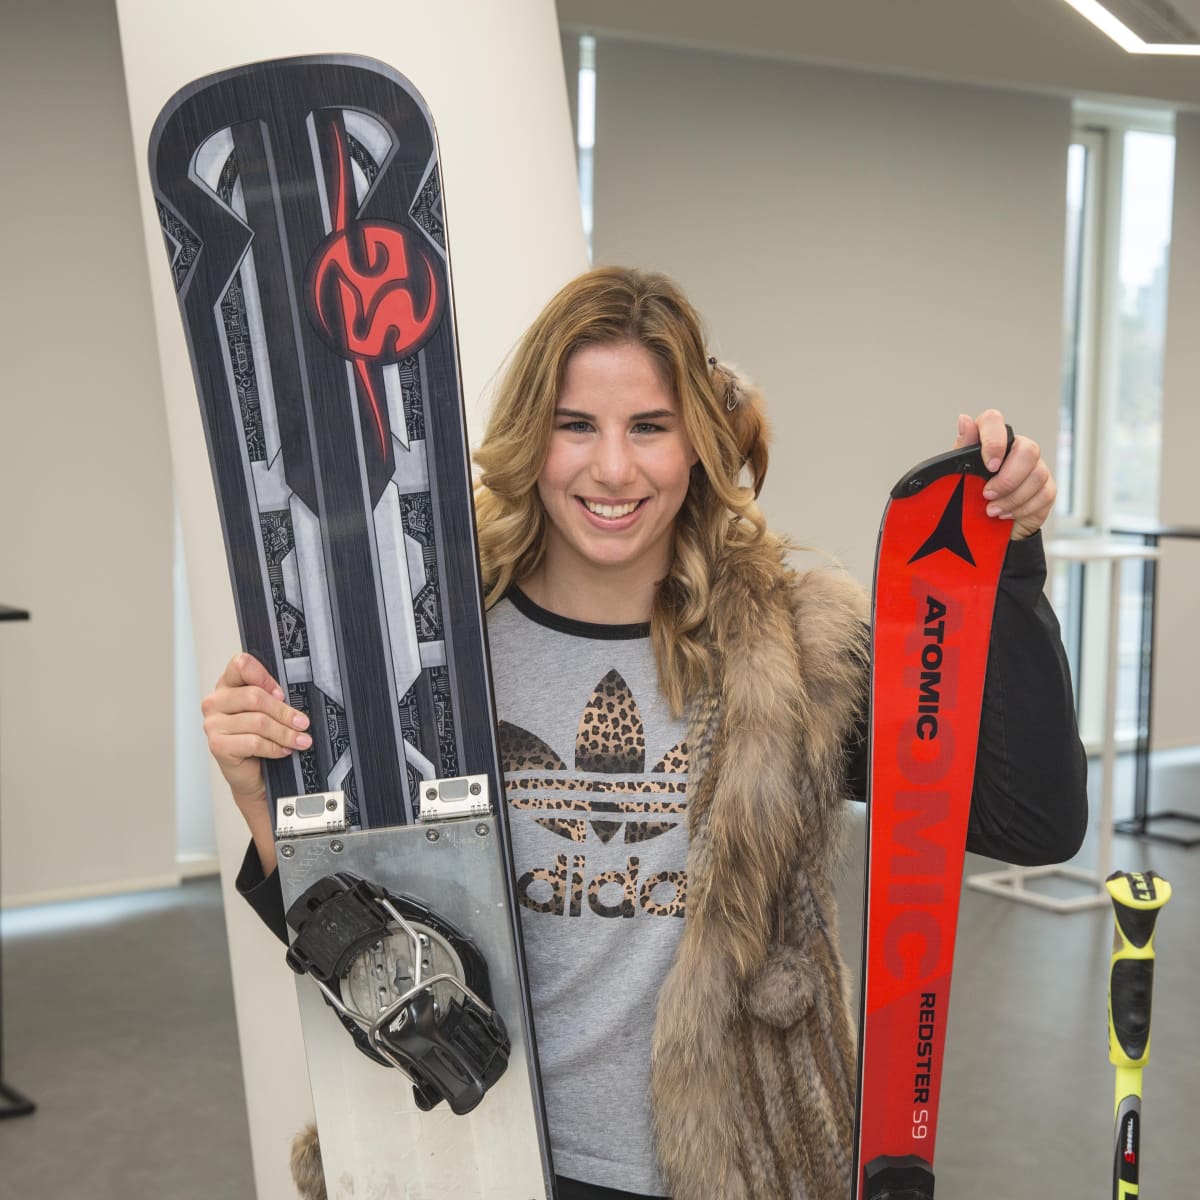 Luchten roddel Ook Double Olympic Gold Medalist Ester Ledecka to Race Ski and Snowboard This  Winter | POWDER - Powder